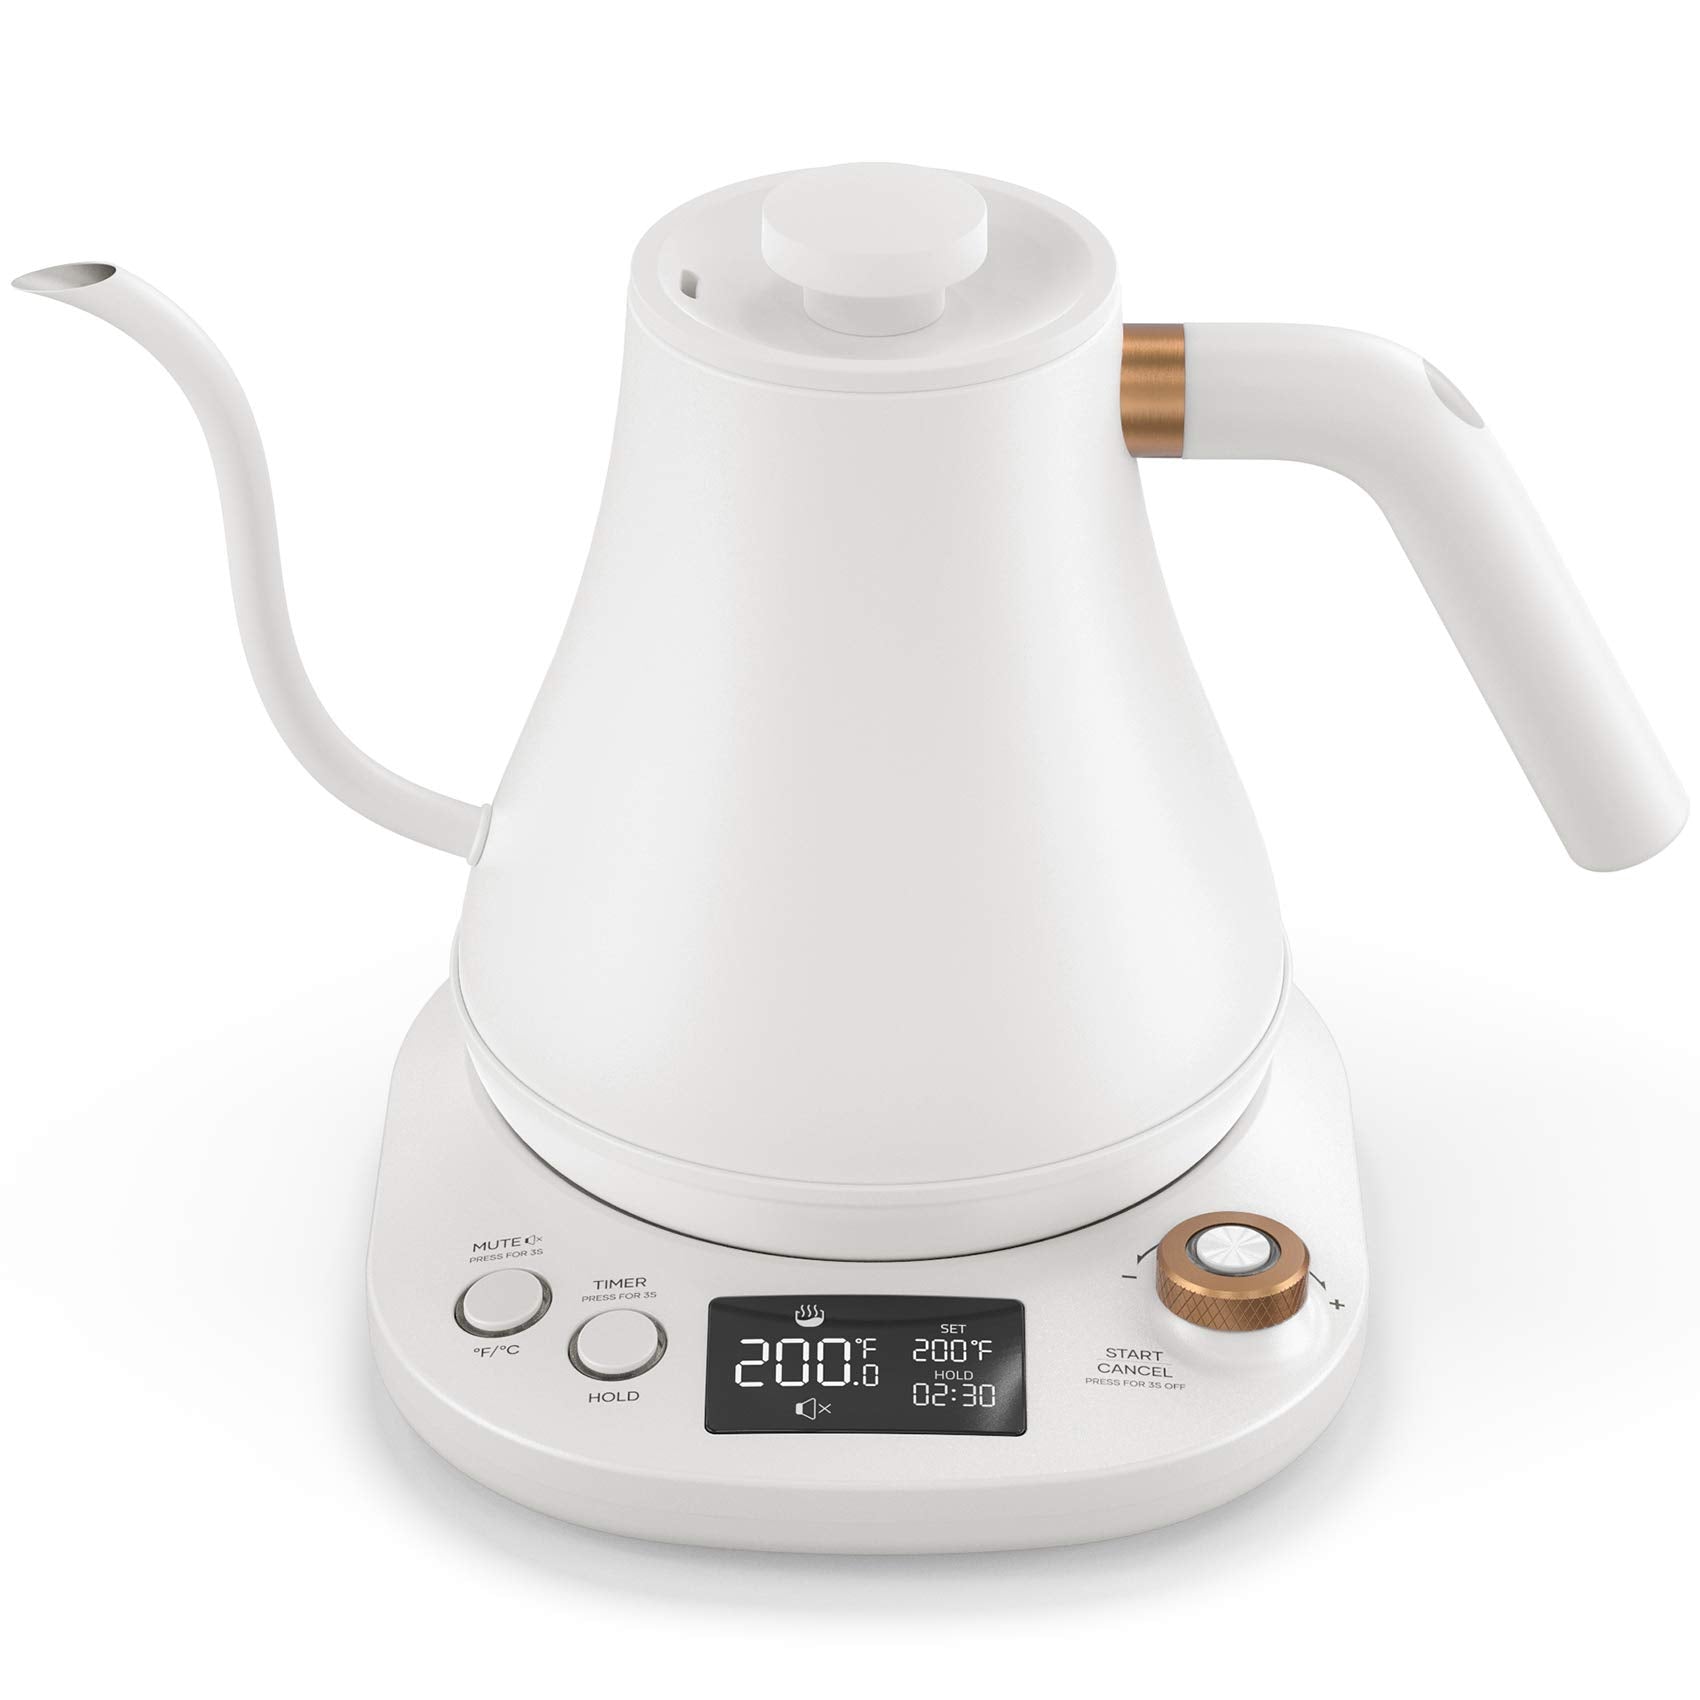 Bsigo Gooseneck Electric Kettle with Thermometer, 100% Stainless Steel for  Pour-over Coffee & Tea Kettle, BPA Free, Auto Shut off Anti-dry Protection